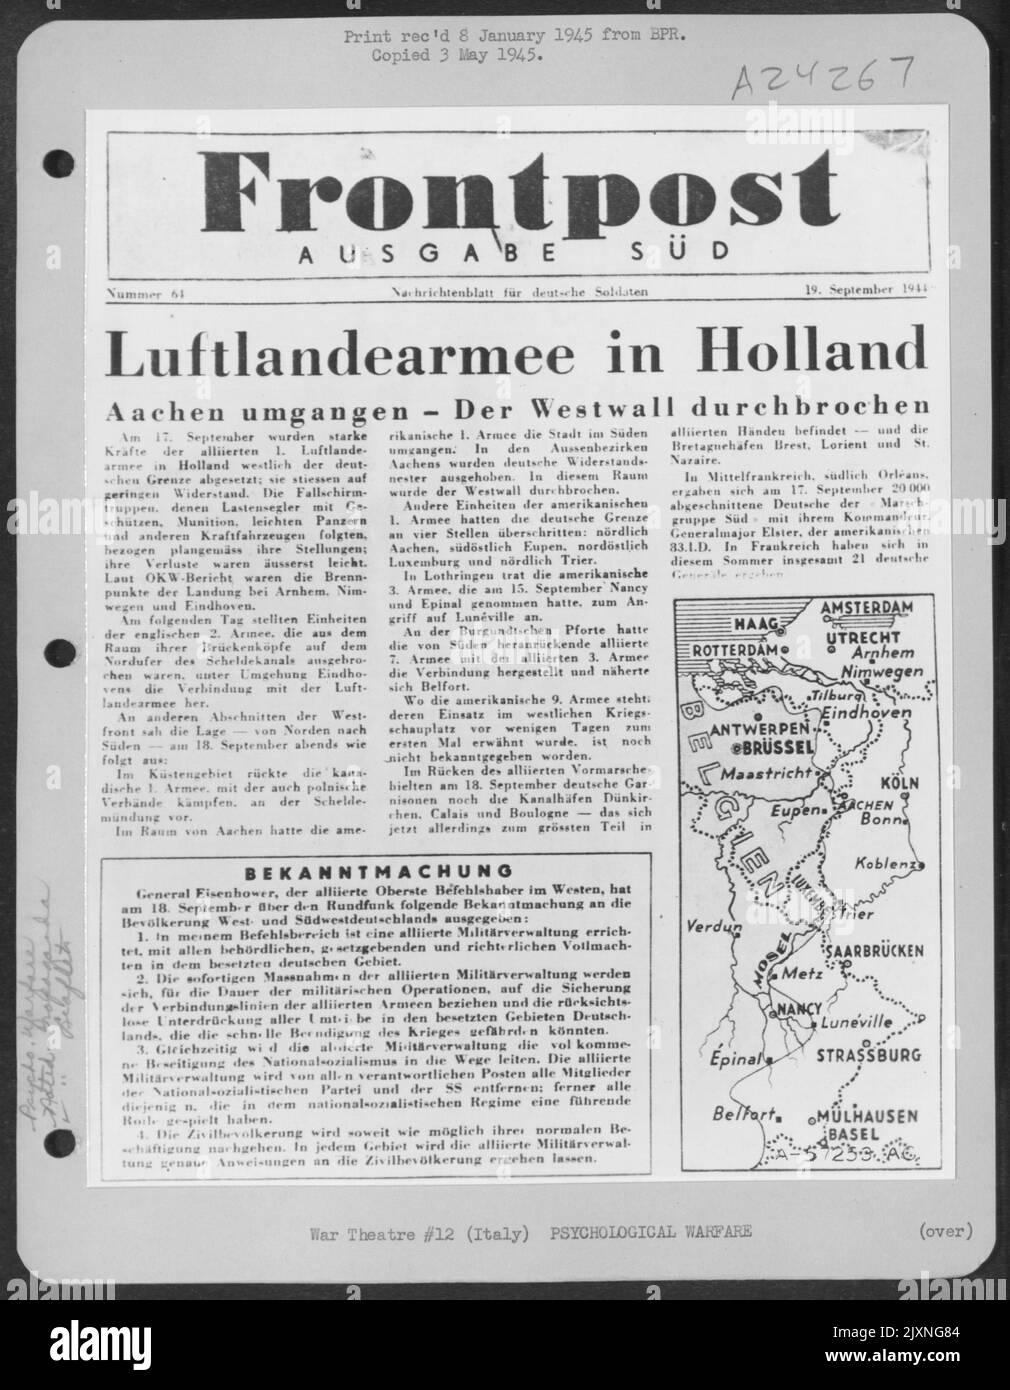 'Airborne Army In Holland' Is The Information Passed On To The Jerries Via This Copy Of 'Frontpost' The American Propaganda Leaflet. Accurate Maps Are Provided To Show The Position Of The Front Lines In The West. Italy. Stock Photo